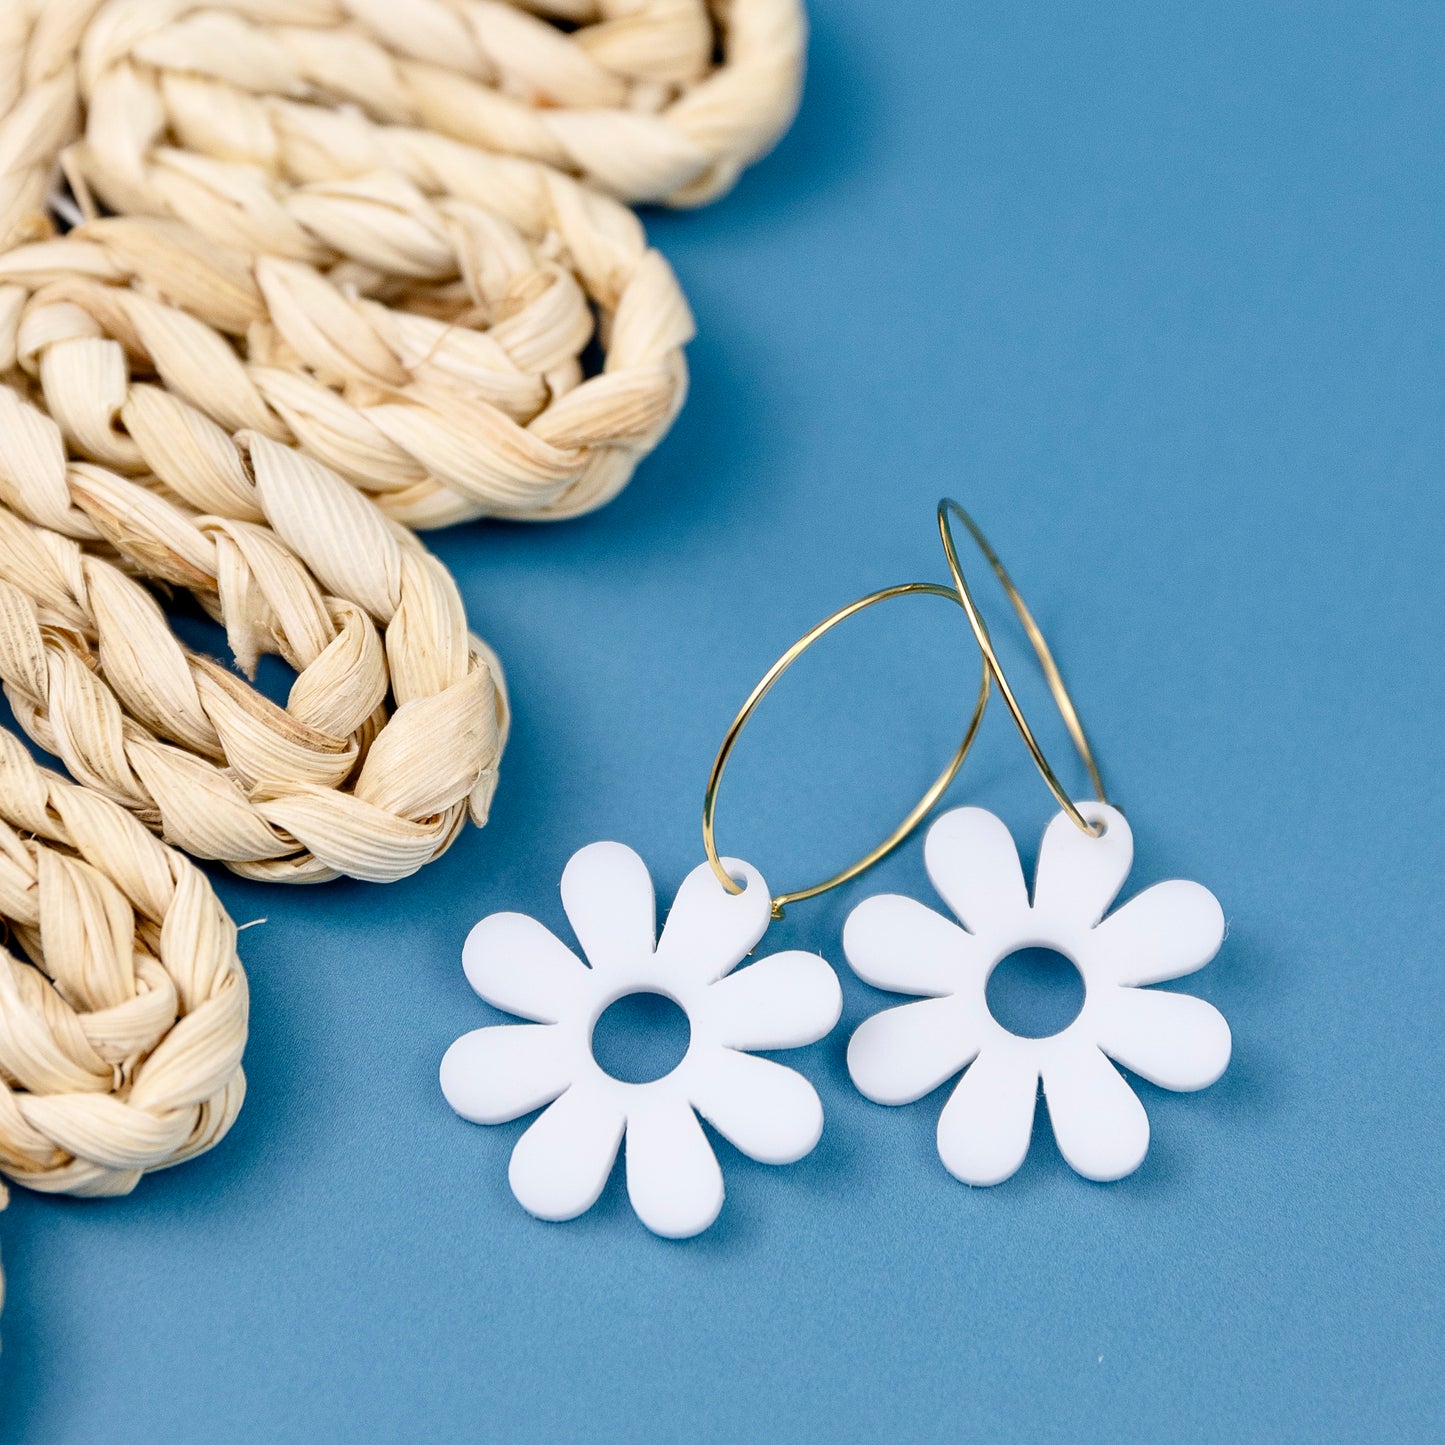 THE PRETTY DAISY in White/ Lightweight Acrylic Statement Earrings